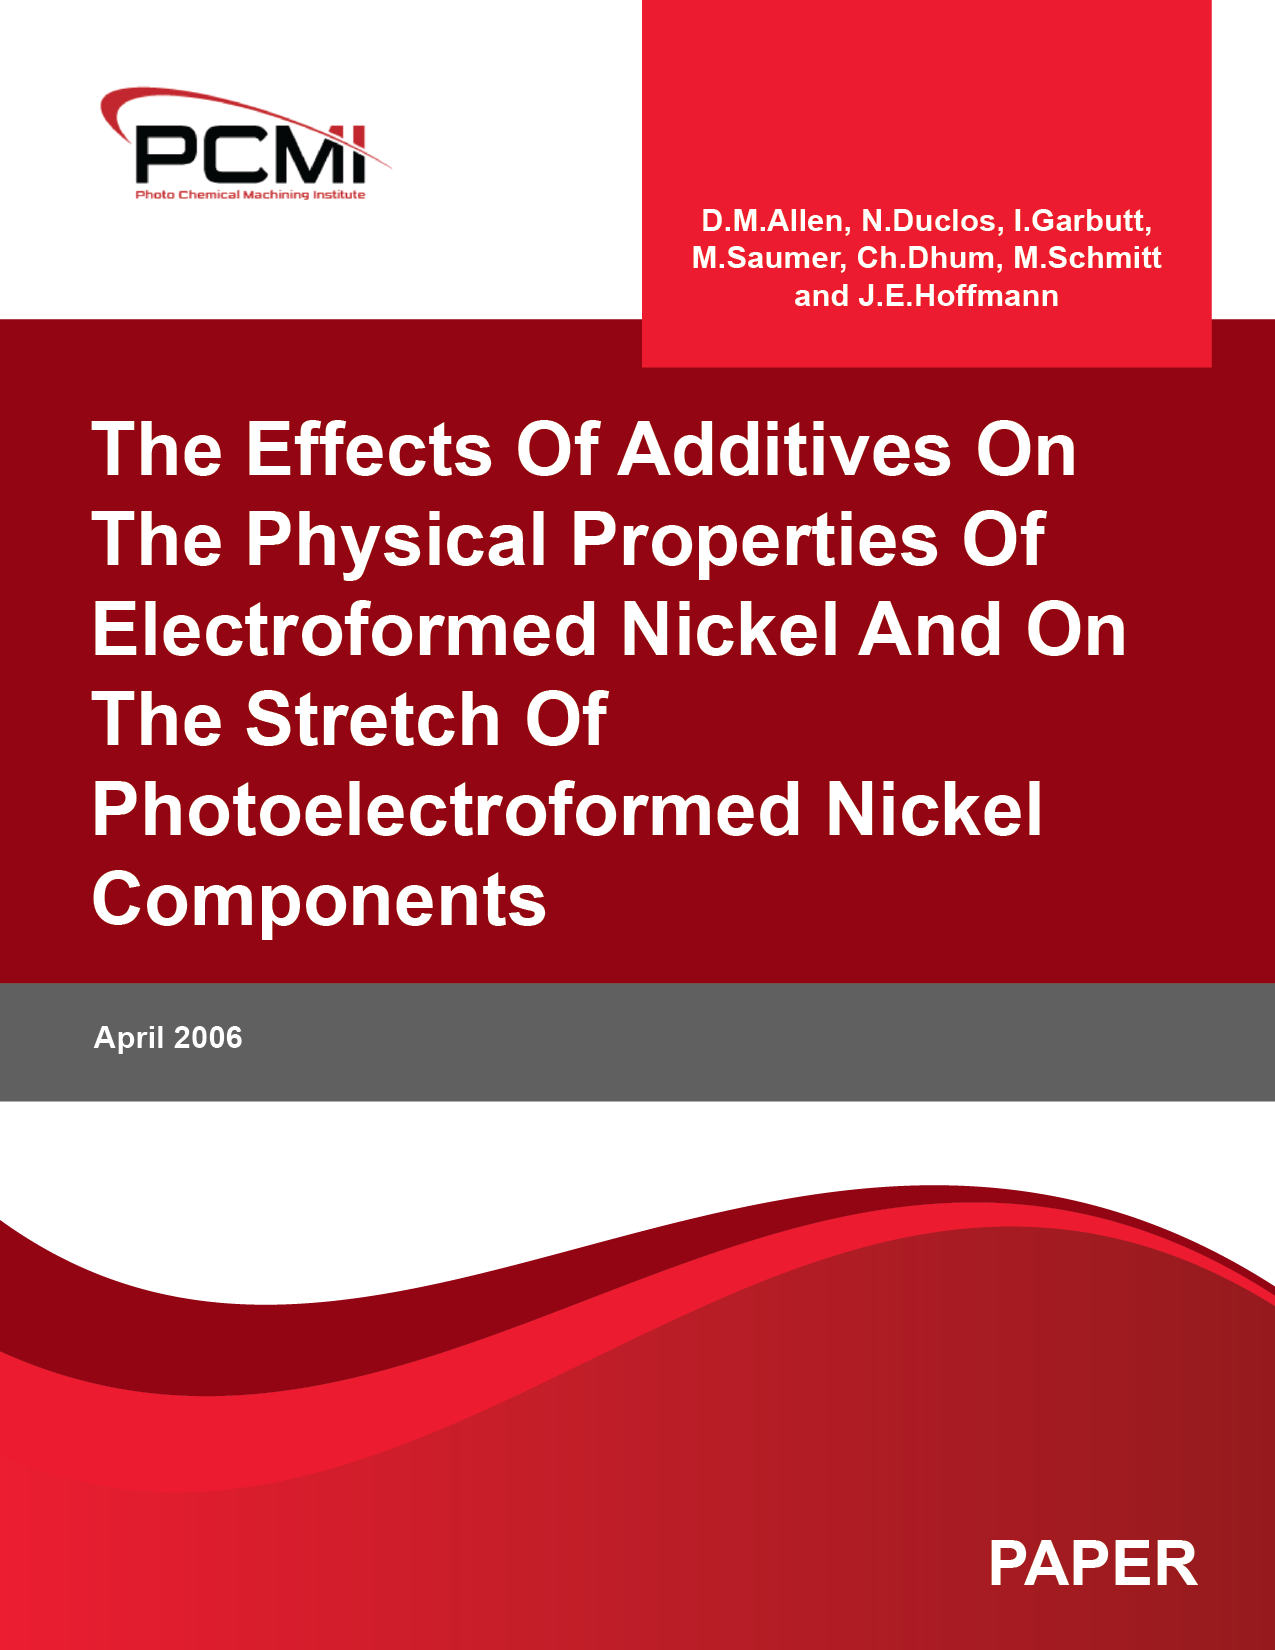 The Effects Of Additives On The Physical Properties Of Electroformed Nickel And On The Stretch Of Photoelectroformed Nickel Components